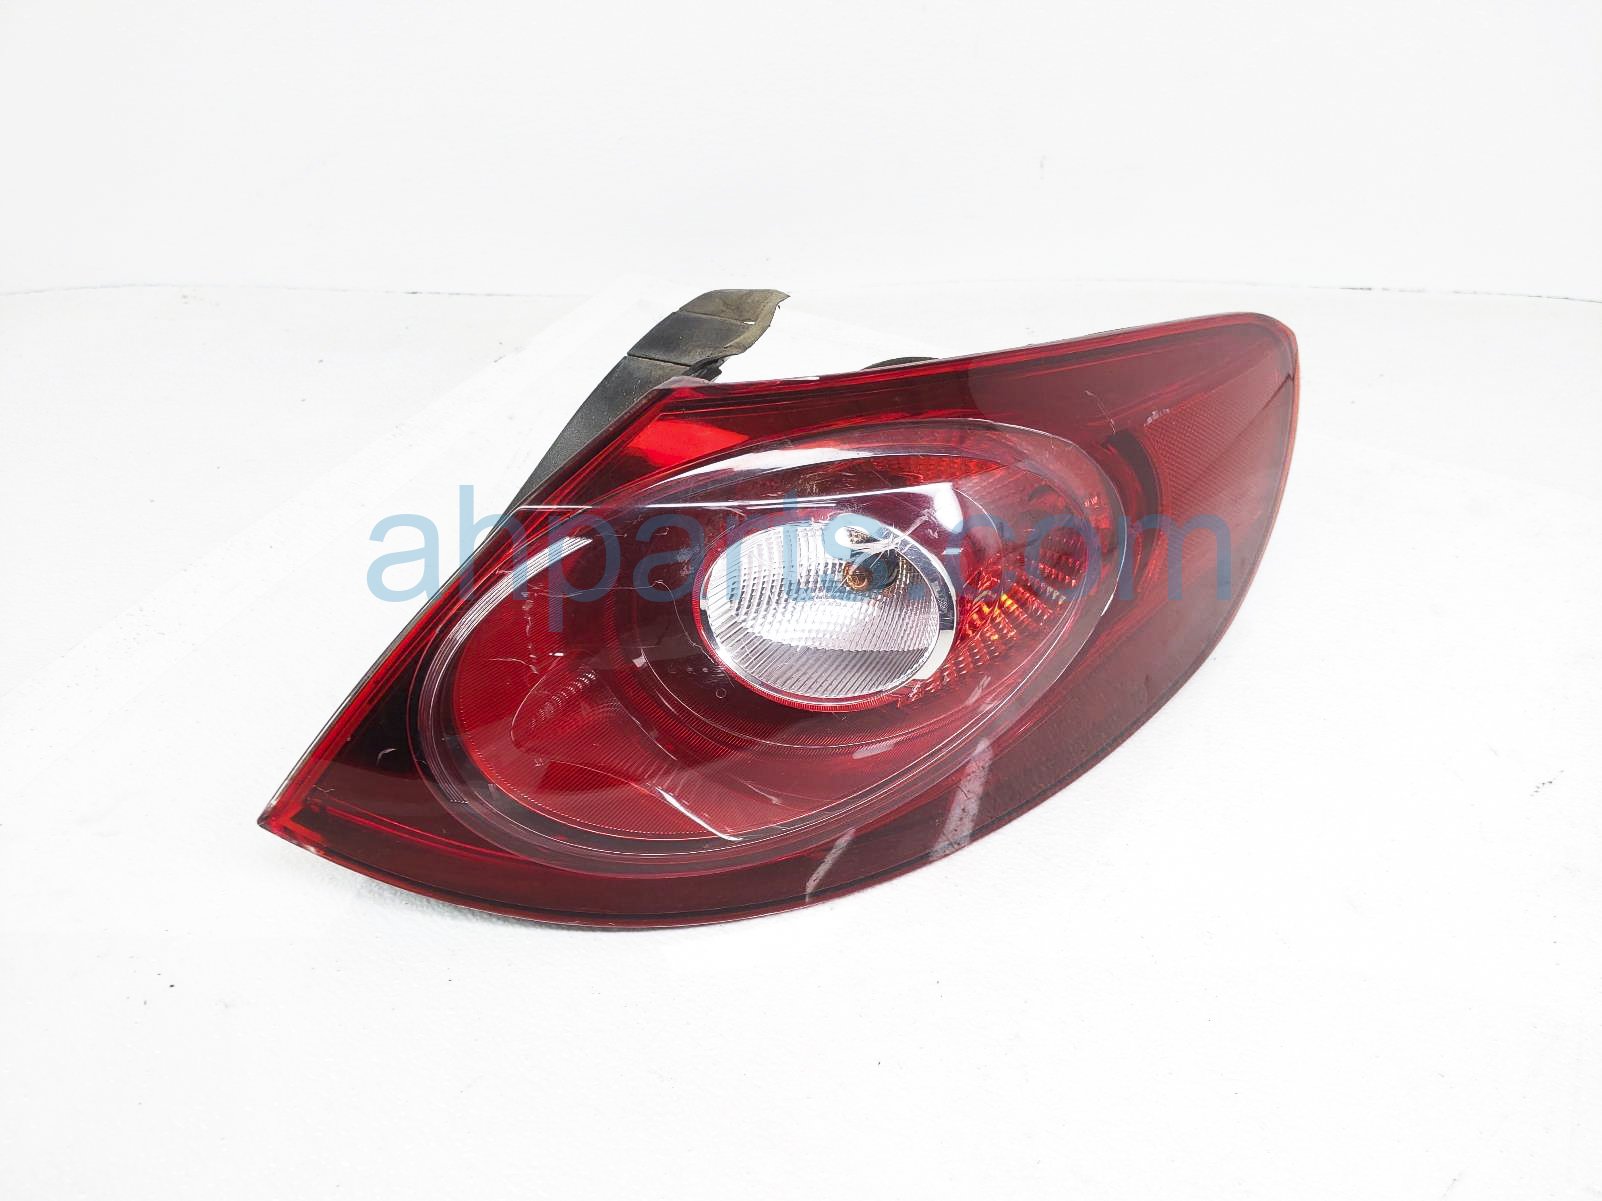 $75 Volkswagen RH TAIL LAMP  (ON BODY) - NOTES